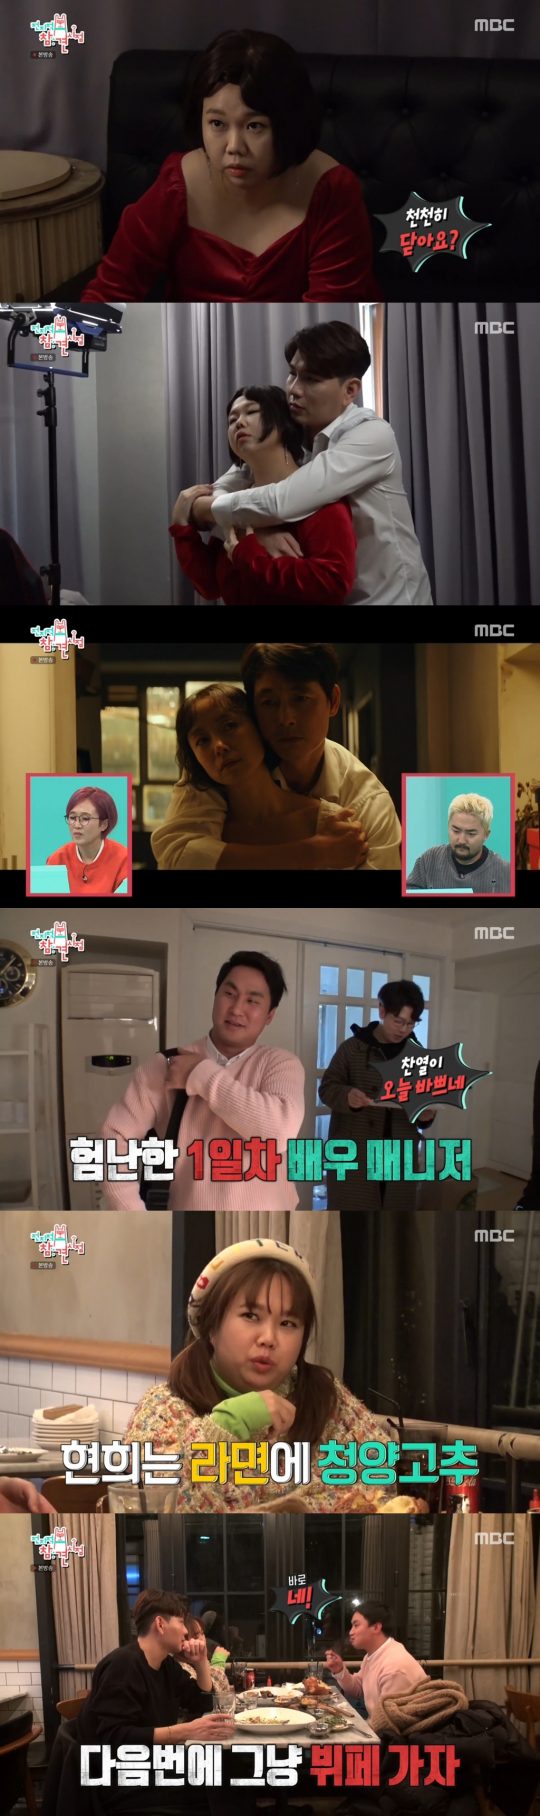 In MBCs Point of Omniscient Interfere, Hong Hyon-hee and Jasons parody shot captured not only the Jeon Do-yeon - Jung Woo-sung but also the viewers.According to Nielsen Korea, a ratings agency, the first part of the 90th Point of Omniscient Interfere, which was broadcast on the 8th, recorded 6.4% of the audience rating in the Seoul metropolitan area and 8.3% in the second part.In addition, the main indicator of advertisers and the core indicator of channel competitiveness, 2049 ratings, recorded 3.2% and 2.8%.This is the number one entertainment program in the same time zone. The highest audience rating at the moment soared to 9.7%.On this day, Hong Hyon-hee - Jason transformed from head to toe to Jeon Do-yeon - Jung Woo-sung and started shooting a full-scale movie parody.The Hong-Sun couple, who checked the script and practiced in time, showed nervousness ahead of the filming.For a while, the Hong-Sun couple continued to laugh at the misunderstanding when they fell on the room.In addition, the support enthusiasm of Park Chan-yeol, the manager for the Hong Hyon-hee - Jason couple, laughed.The manager showed off the care that was not timing unlike the burning motivation. The Hong-Sun couple titled with the manager who came to care when they did not need it.The parody video, which contains the efforts of the three people, boasted the original video and the high synchro rate.Hong Hyon-hee said, Jeon Do-yeon and Jung Woo-sung have enjoyed the parody video.He invited me to the movie premiere. The figure of the Hong-Sun couple and the manager who eat after successfully taking a parody video rose to 9.7% of the highest audience rating.Hong Hyon-hee, who usually likes Korean food, challenged the style there.In the end, Hong Hyon-hee, who did not eat well because he did not fit his taste, said, I should go home and boil it if I go home.